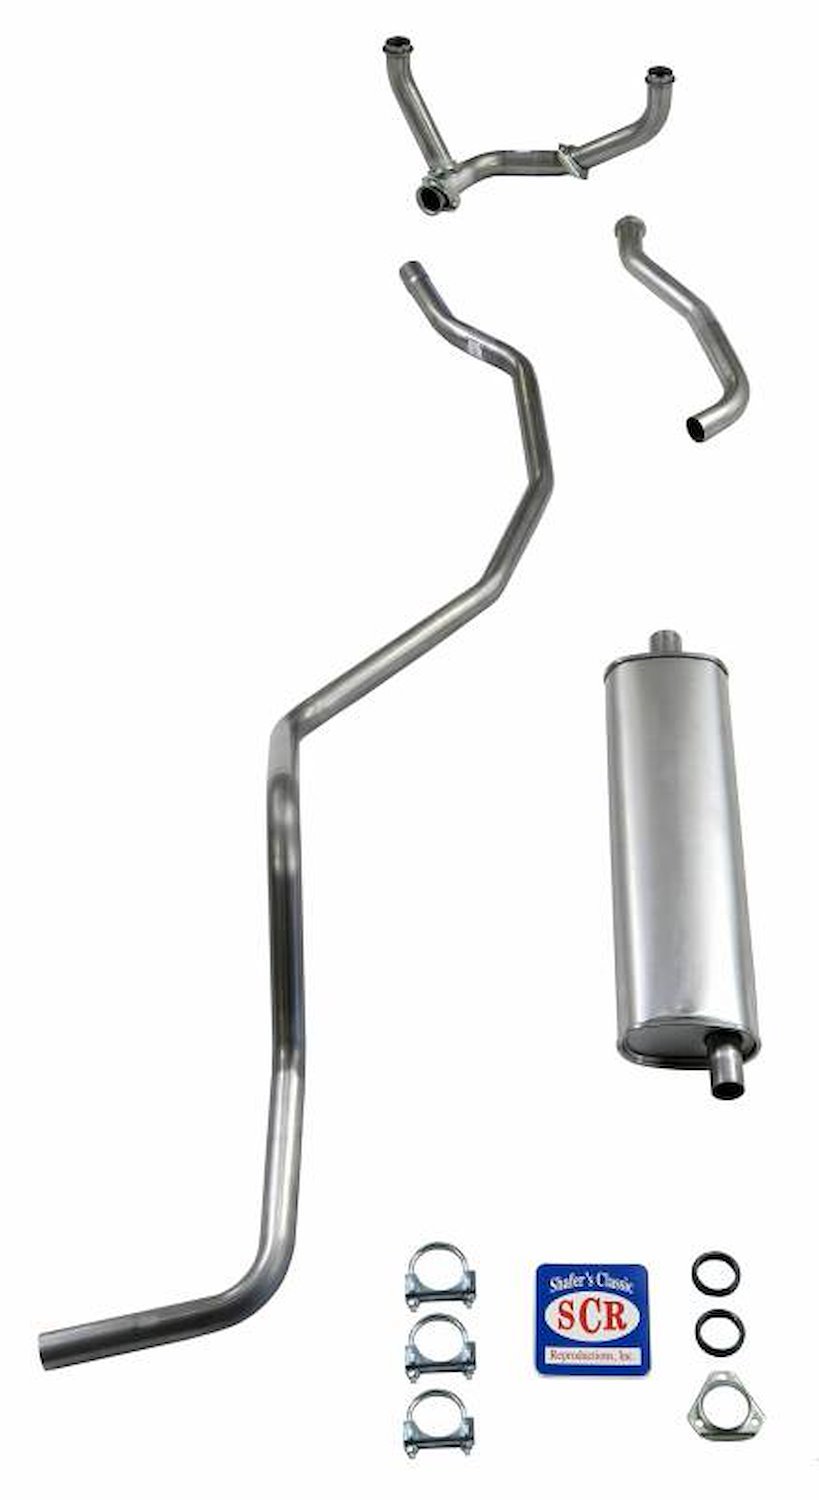 73039S 1960-1964 Chevrolet SW 8-cyl 283 Single Exhaust & ONLY 1960 El Camino Exhaust System, 304 Stainless Steel